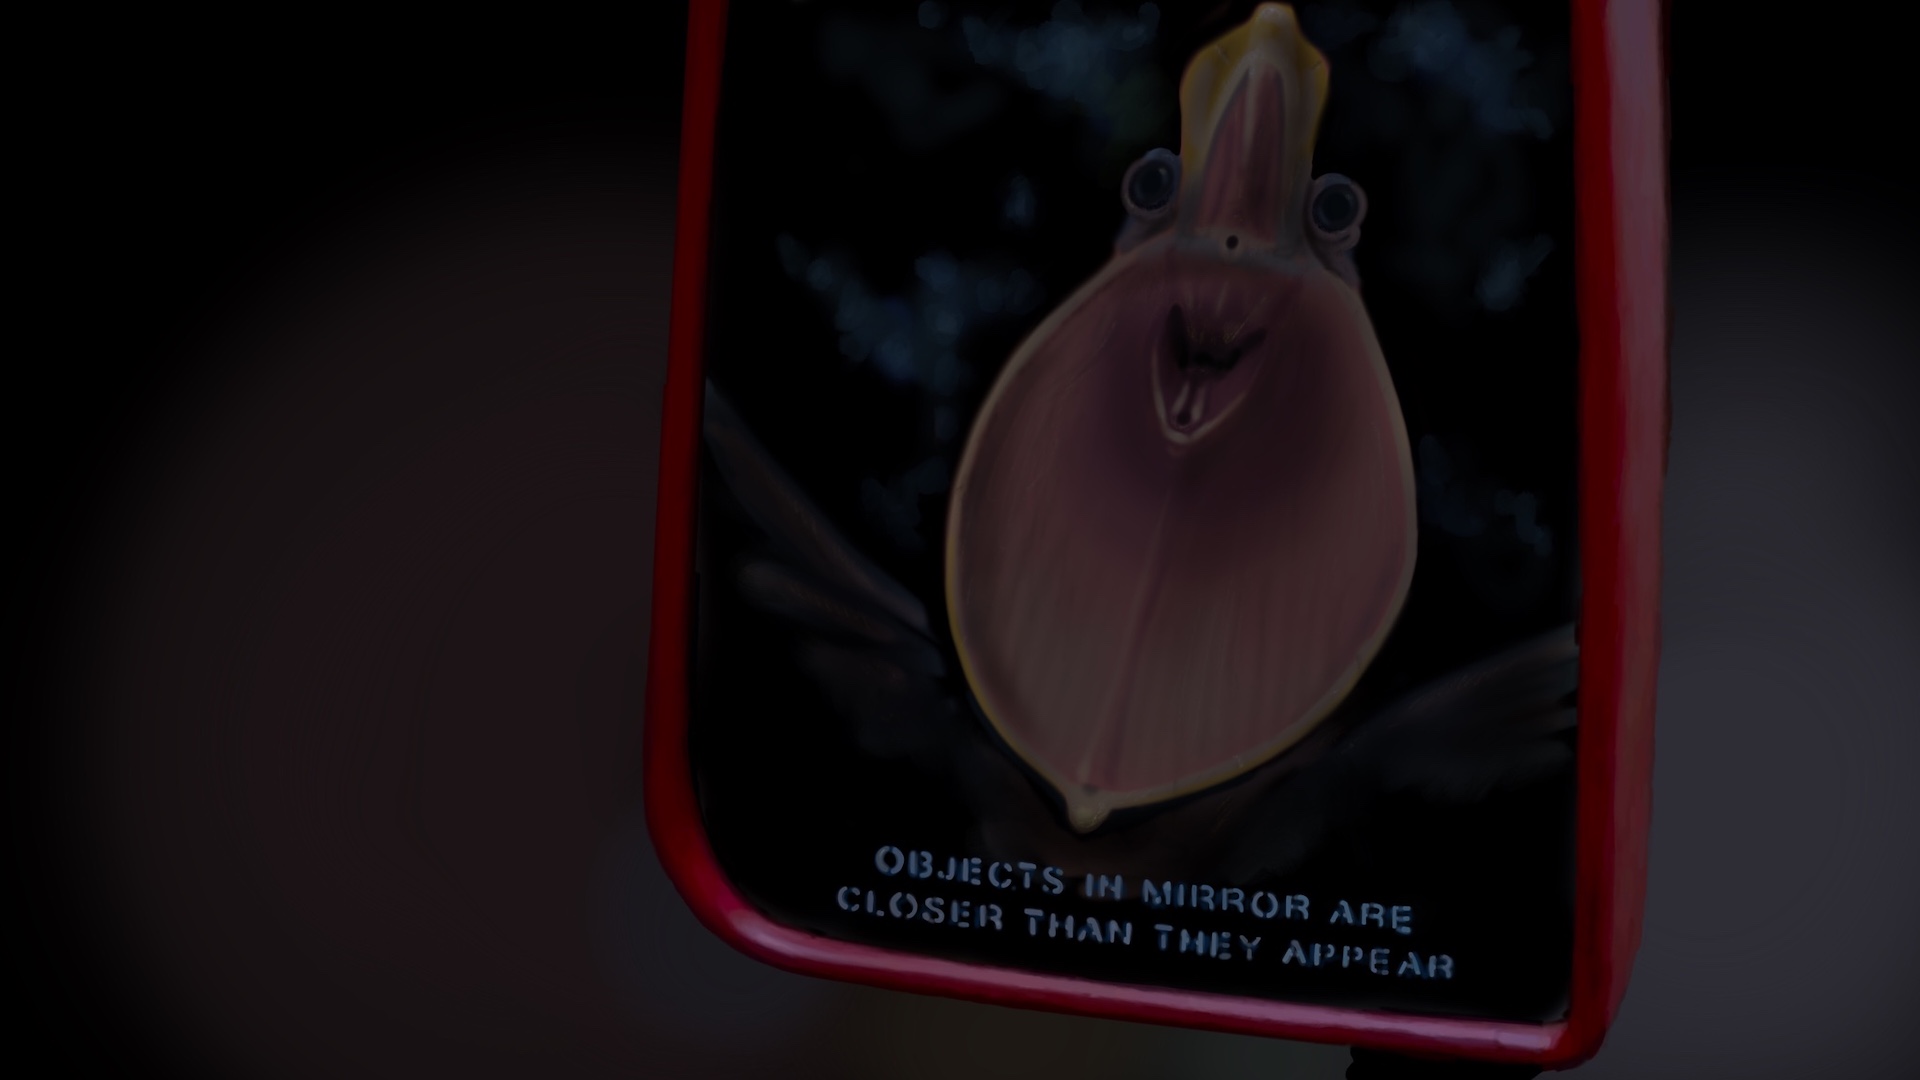 Digitally painted reproduction of of a frame from Jurassic Park, but instead of a T-rex being shown in the rear view mirror, it's the gaping maw of a giant pelian.'